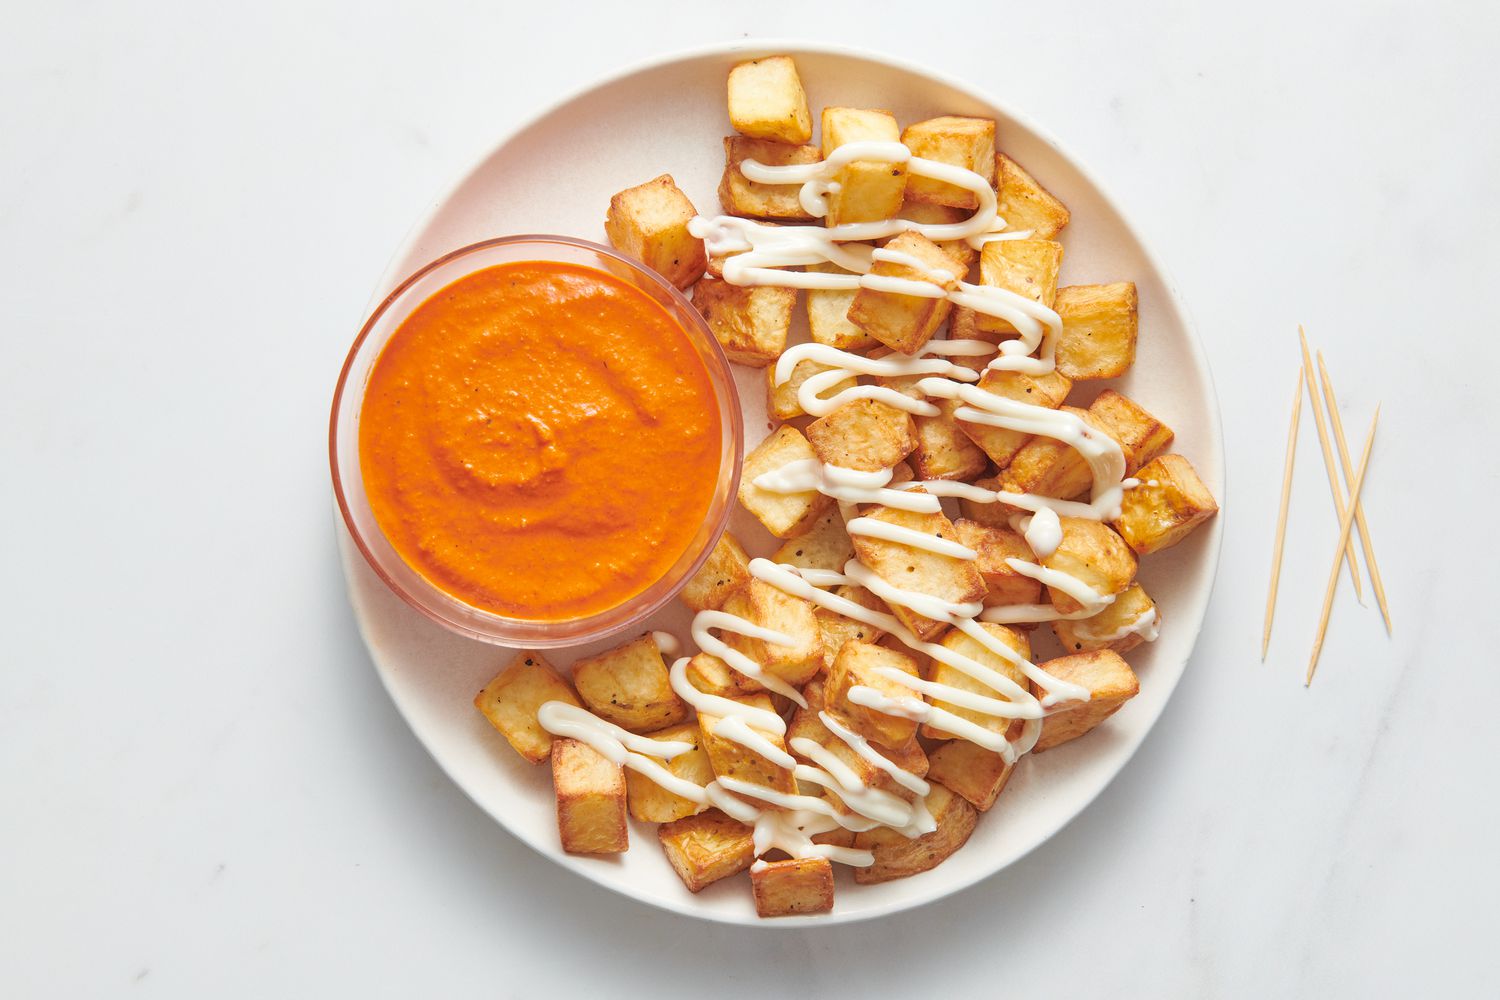 A plater of patatas bravas, drizzled with aioli and served with a small bowl of romesco sauce, with toothpicks on the side. 